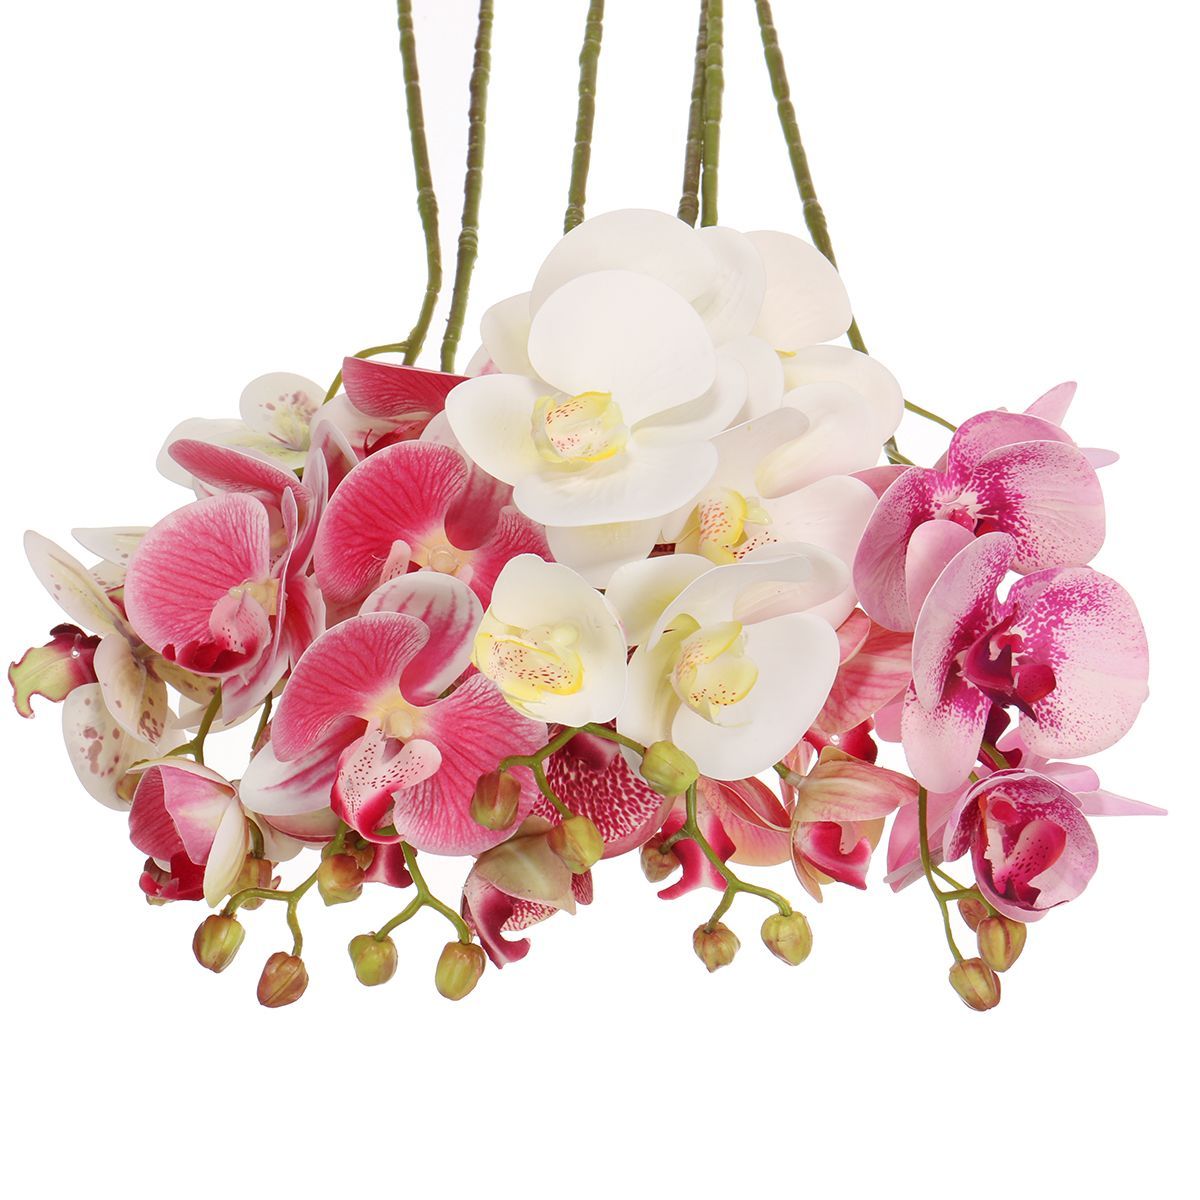 3D-Artificial-Butterfly-Orchid-Flower-Home-Wedding-Party-Car-DIY-Home-Decorations-1635333